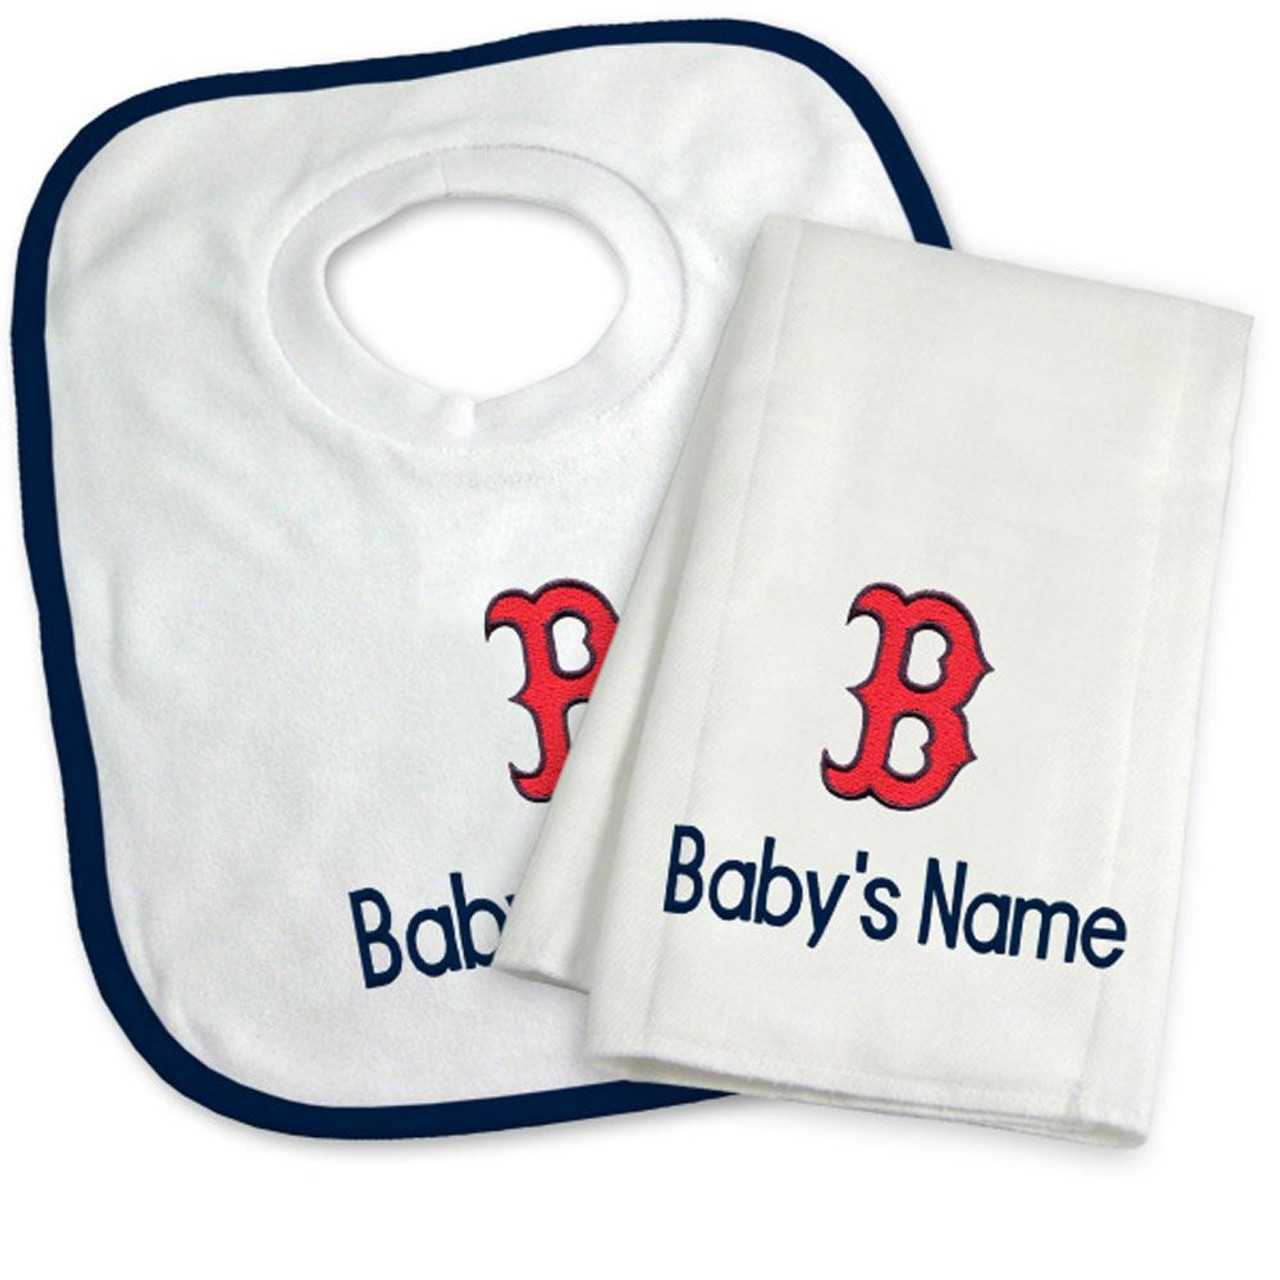 Kids Boston Red Sox Gifts & Gear, Youth Red Sox Apparel, Merchandise